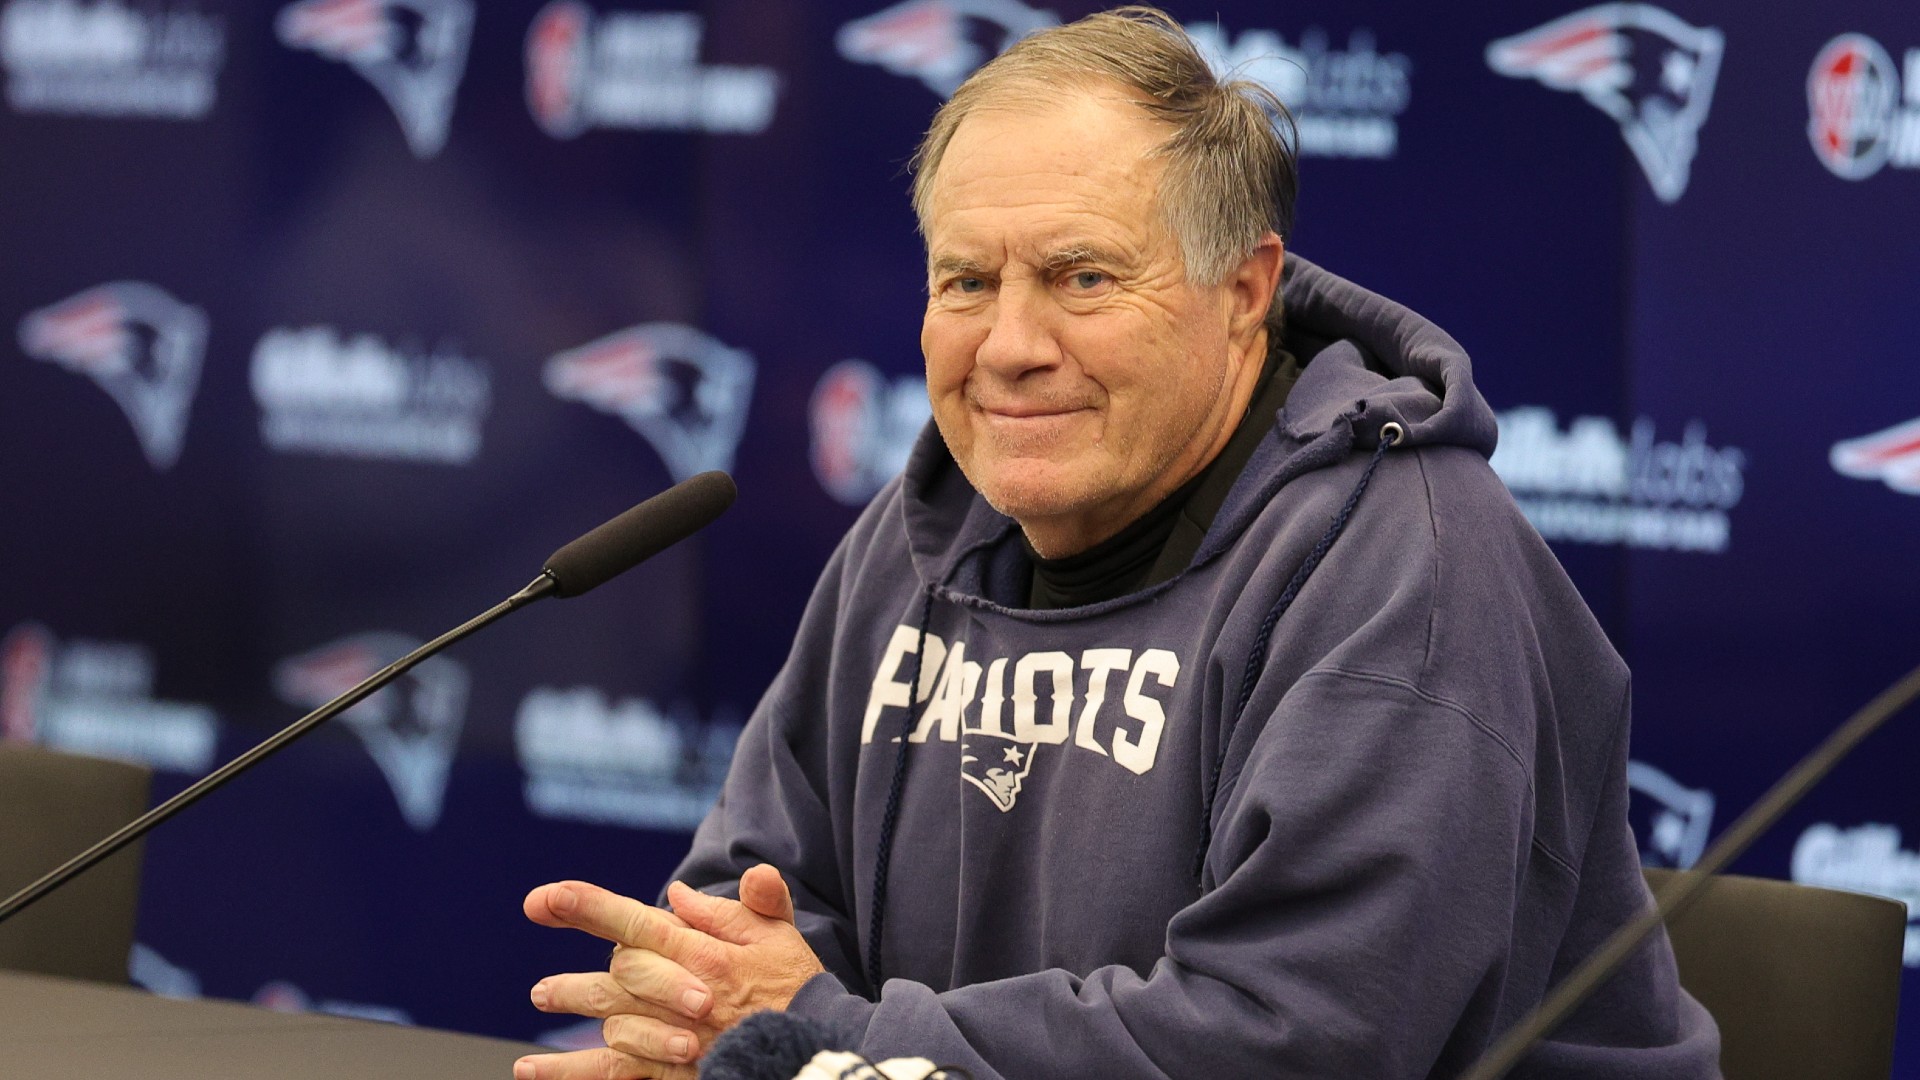 Bill Belichick To Make Appearance On ‘College GameDay’ For
Army-Navy Game